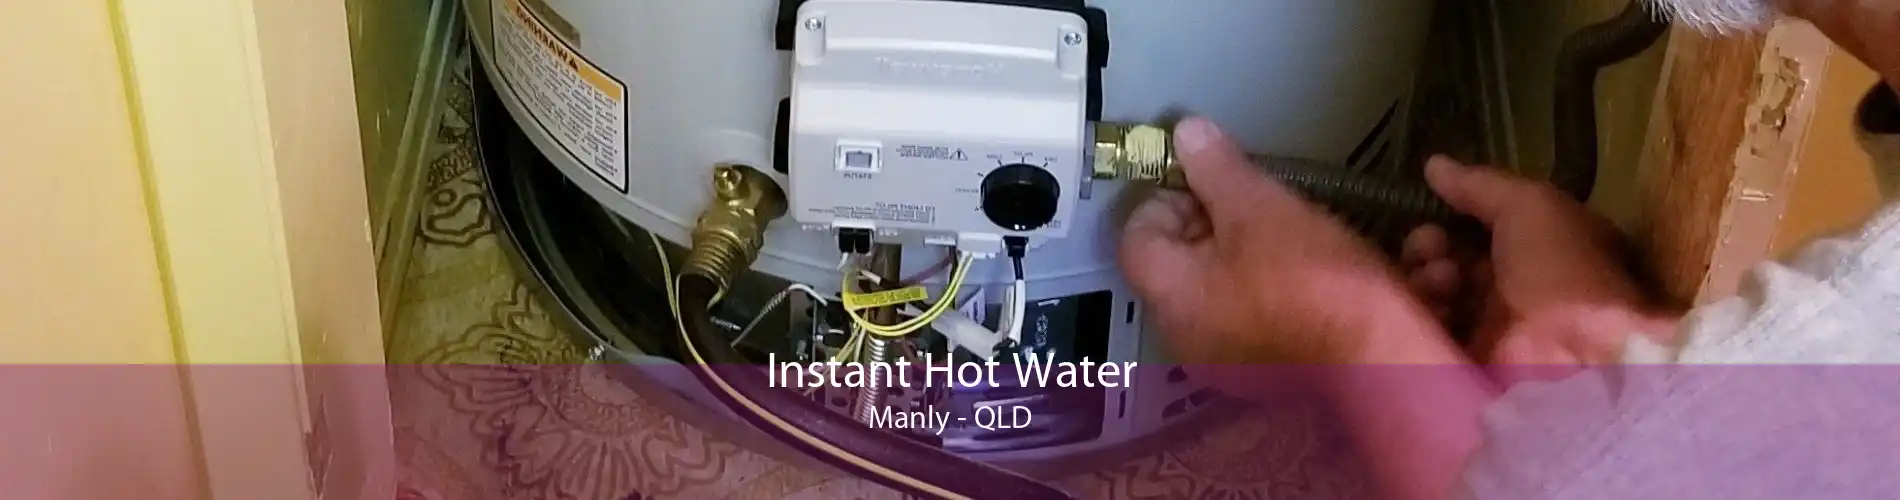 Instant Hot Water Manly - QLD